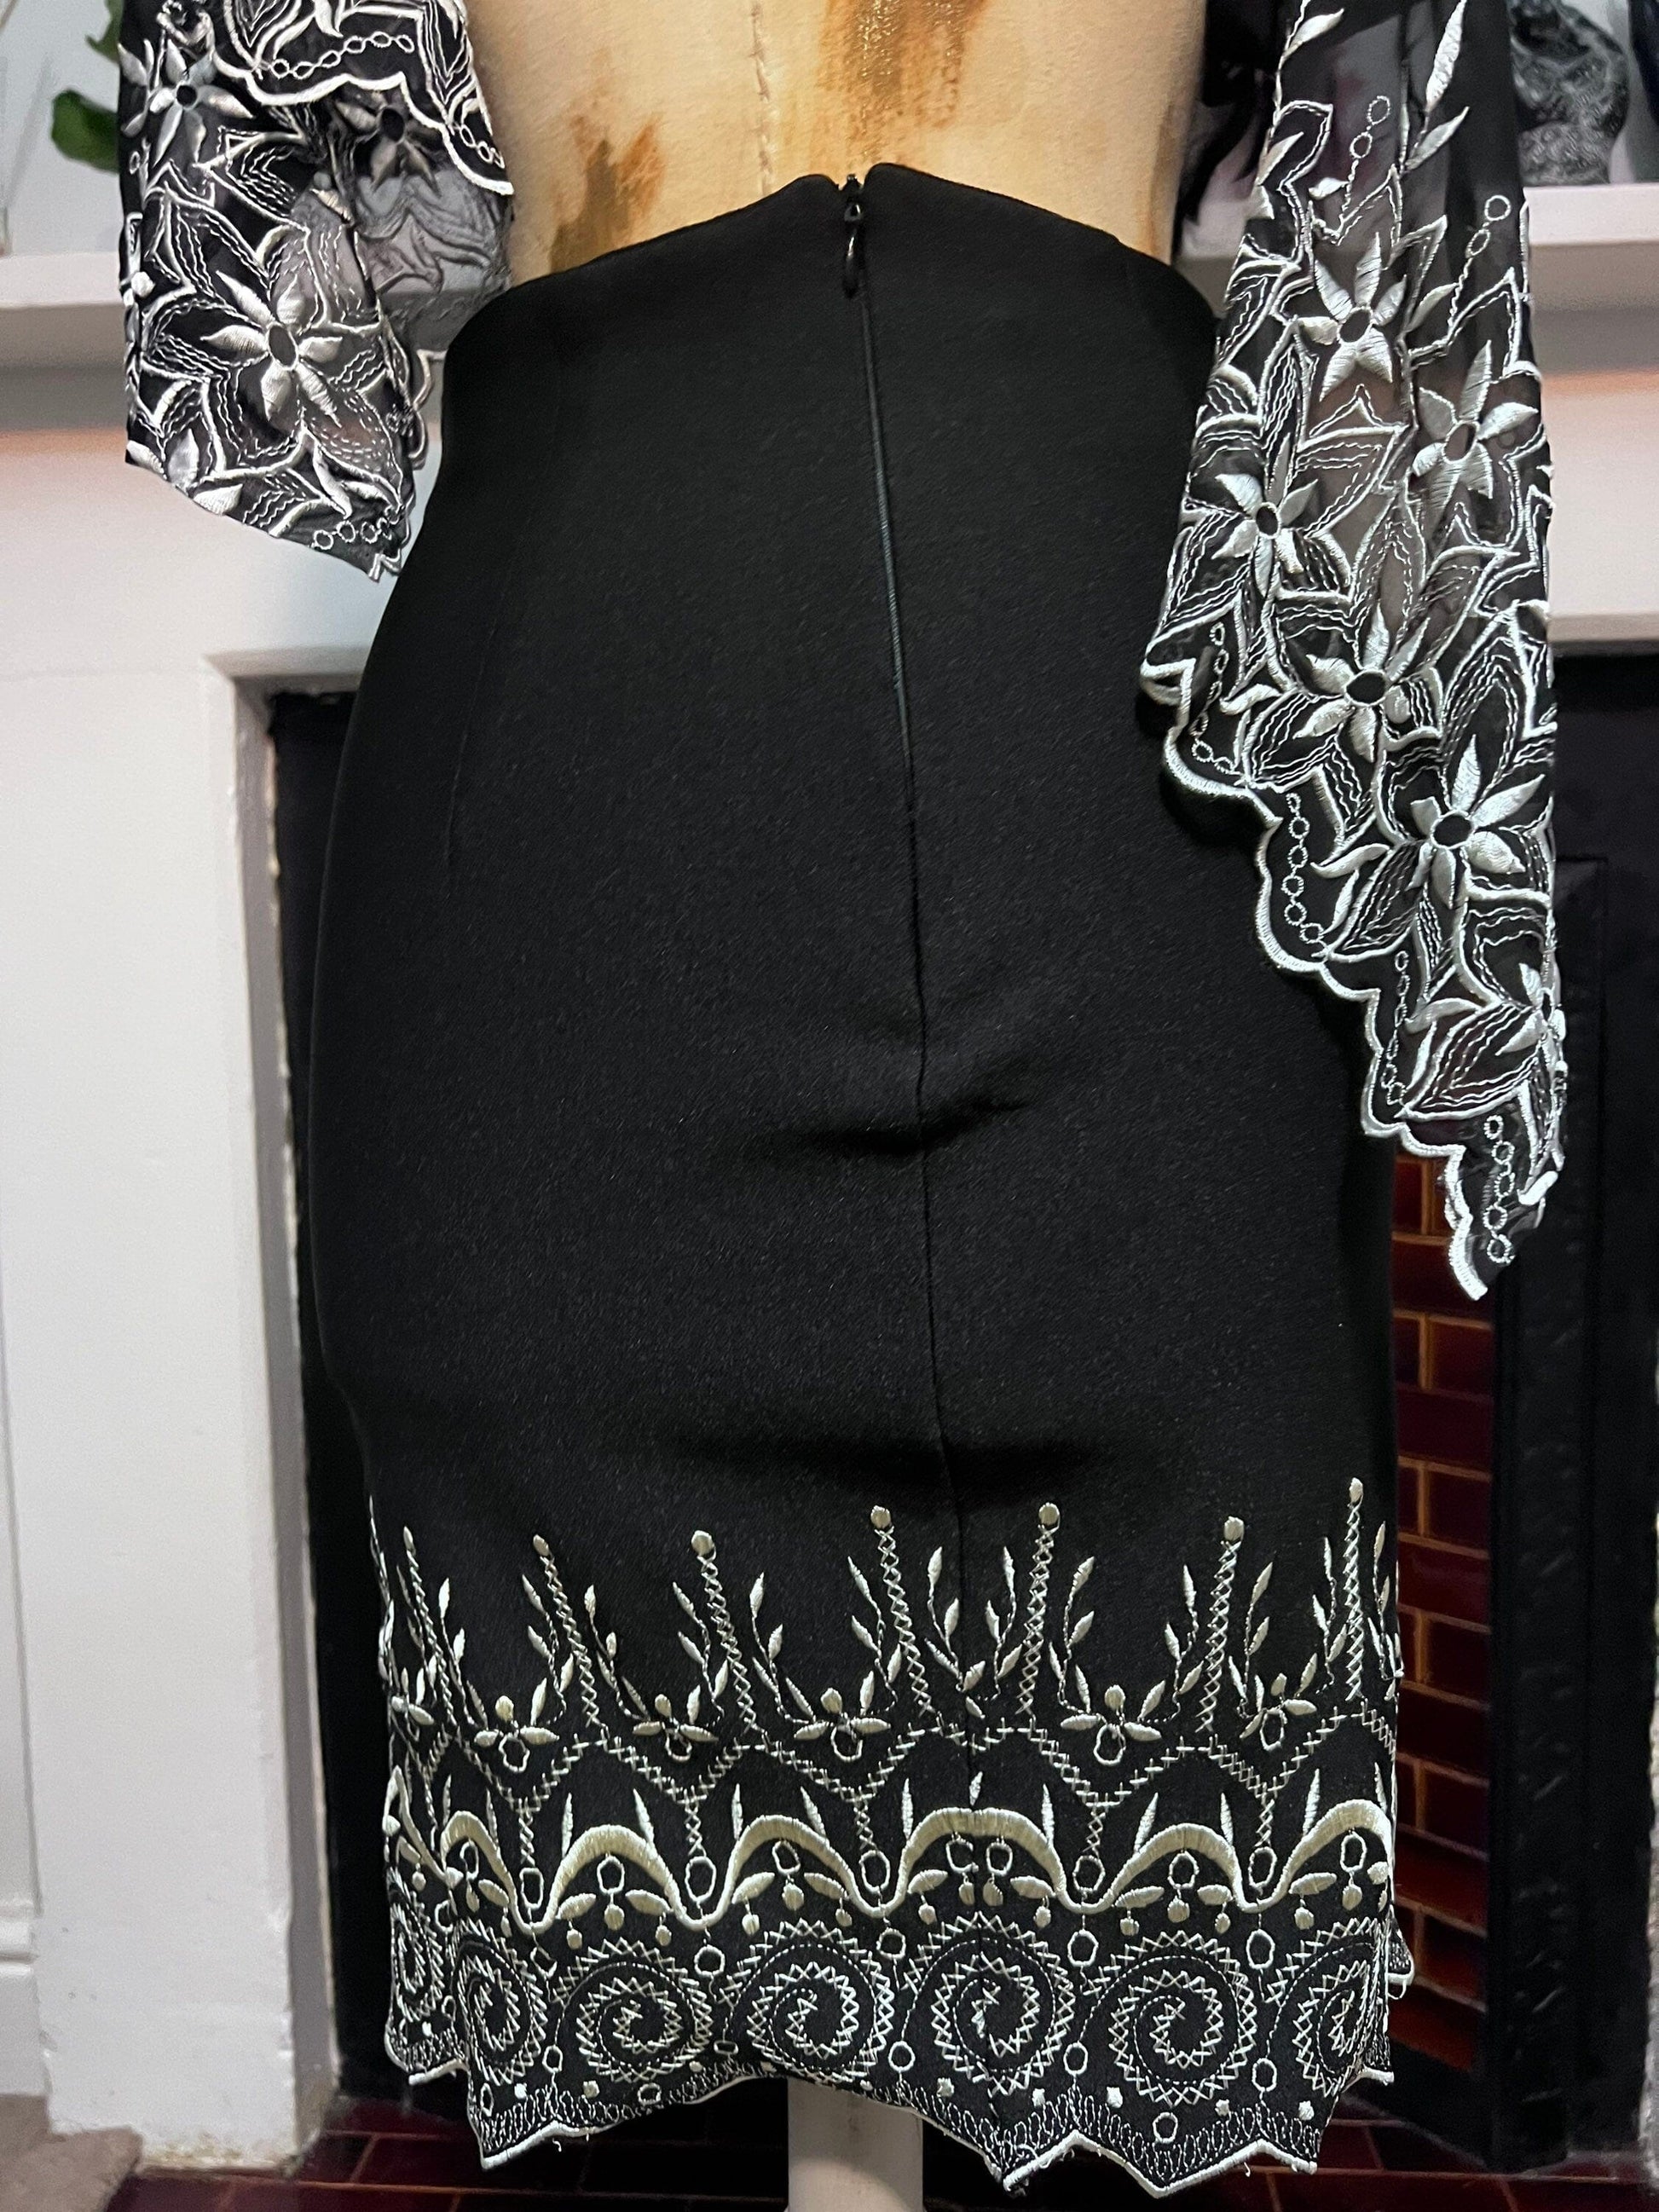 Vintage Suit two peice skirt and top black and white  - sheer waistcoat and skirt floral design with embroidered overlay waistcoat UK12